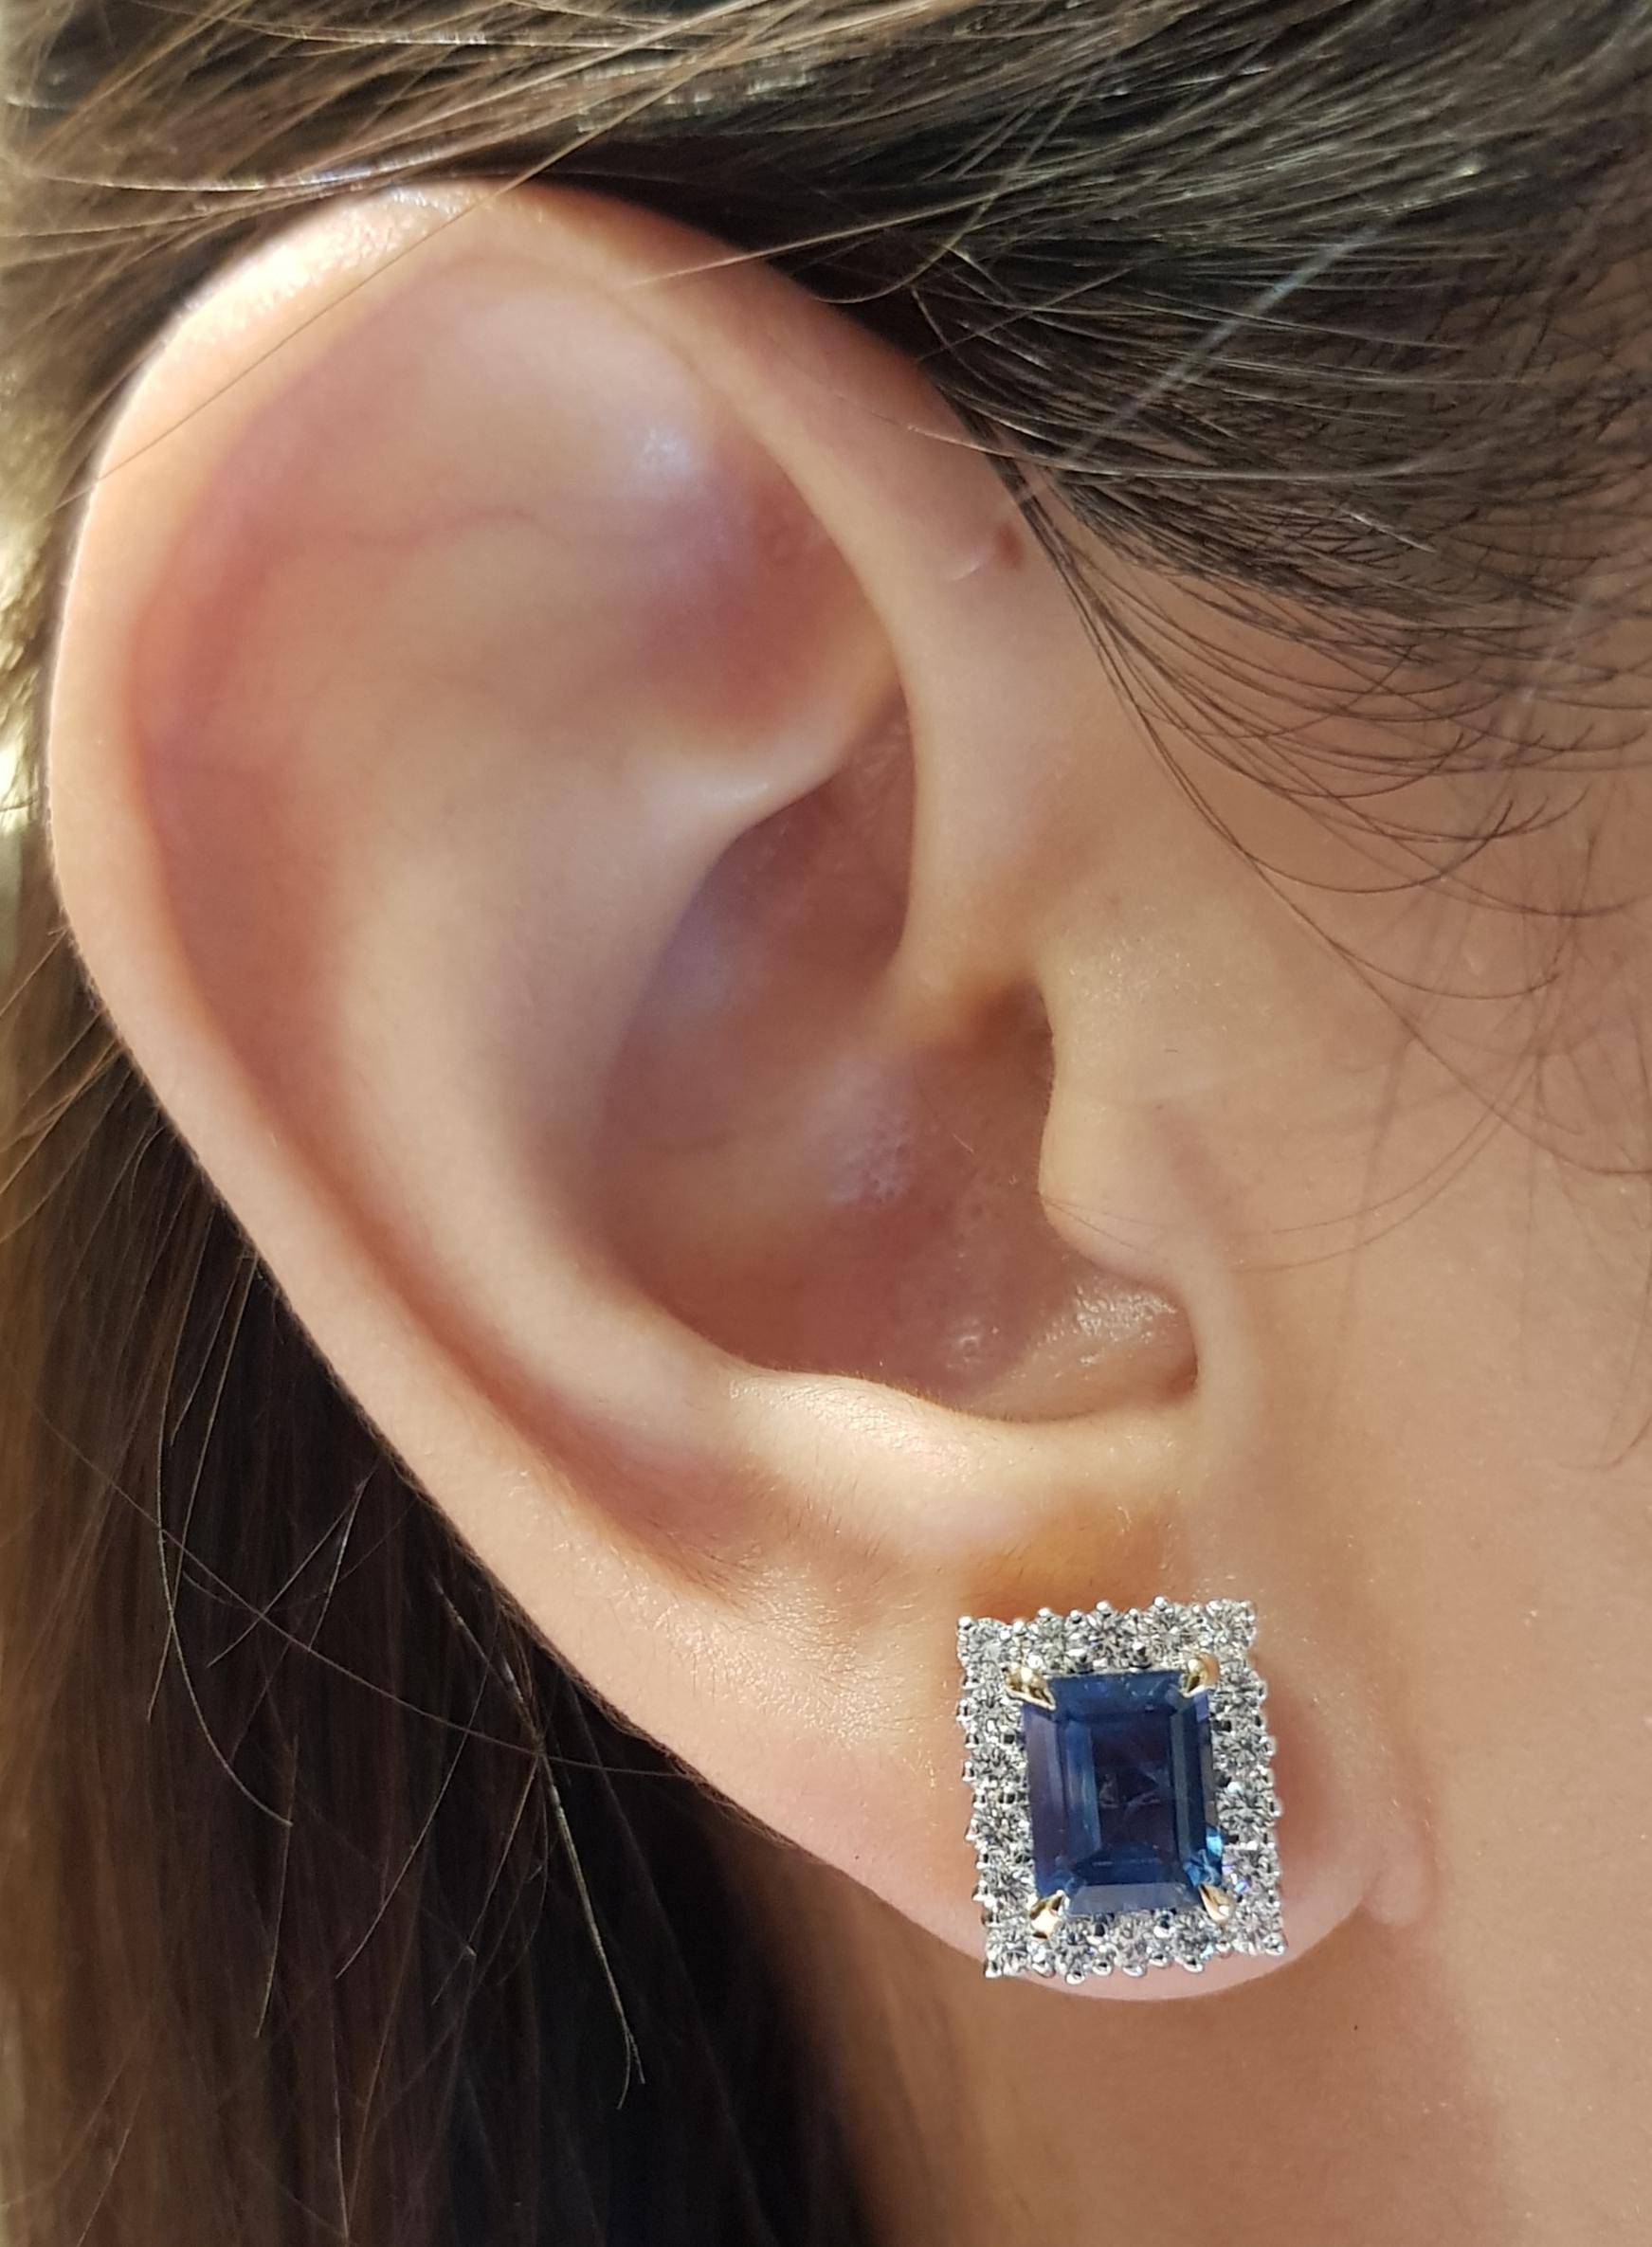 Blue Sapphire 3.21 carats with Diamond 0.91 carat Earrings set in 18 Karat Gold Settings

Width:  1.0 cm 
Length:  1.2 cm
Total Weight: 6.36 grams

